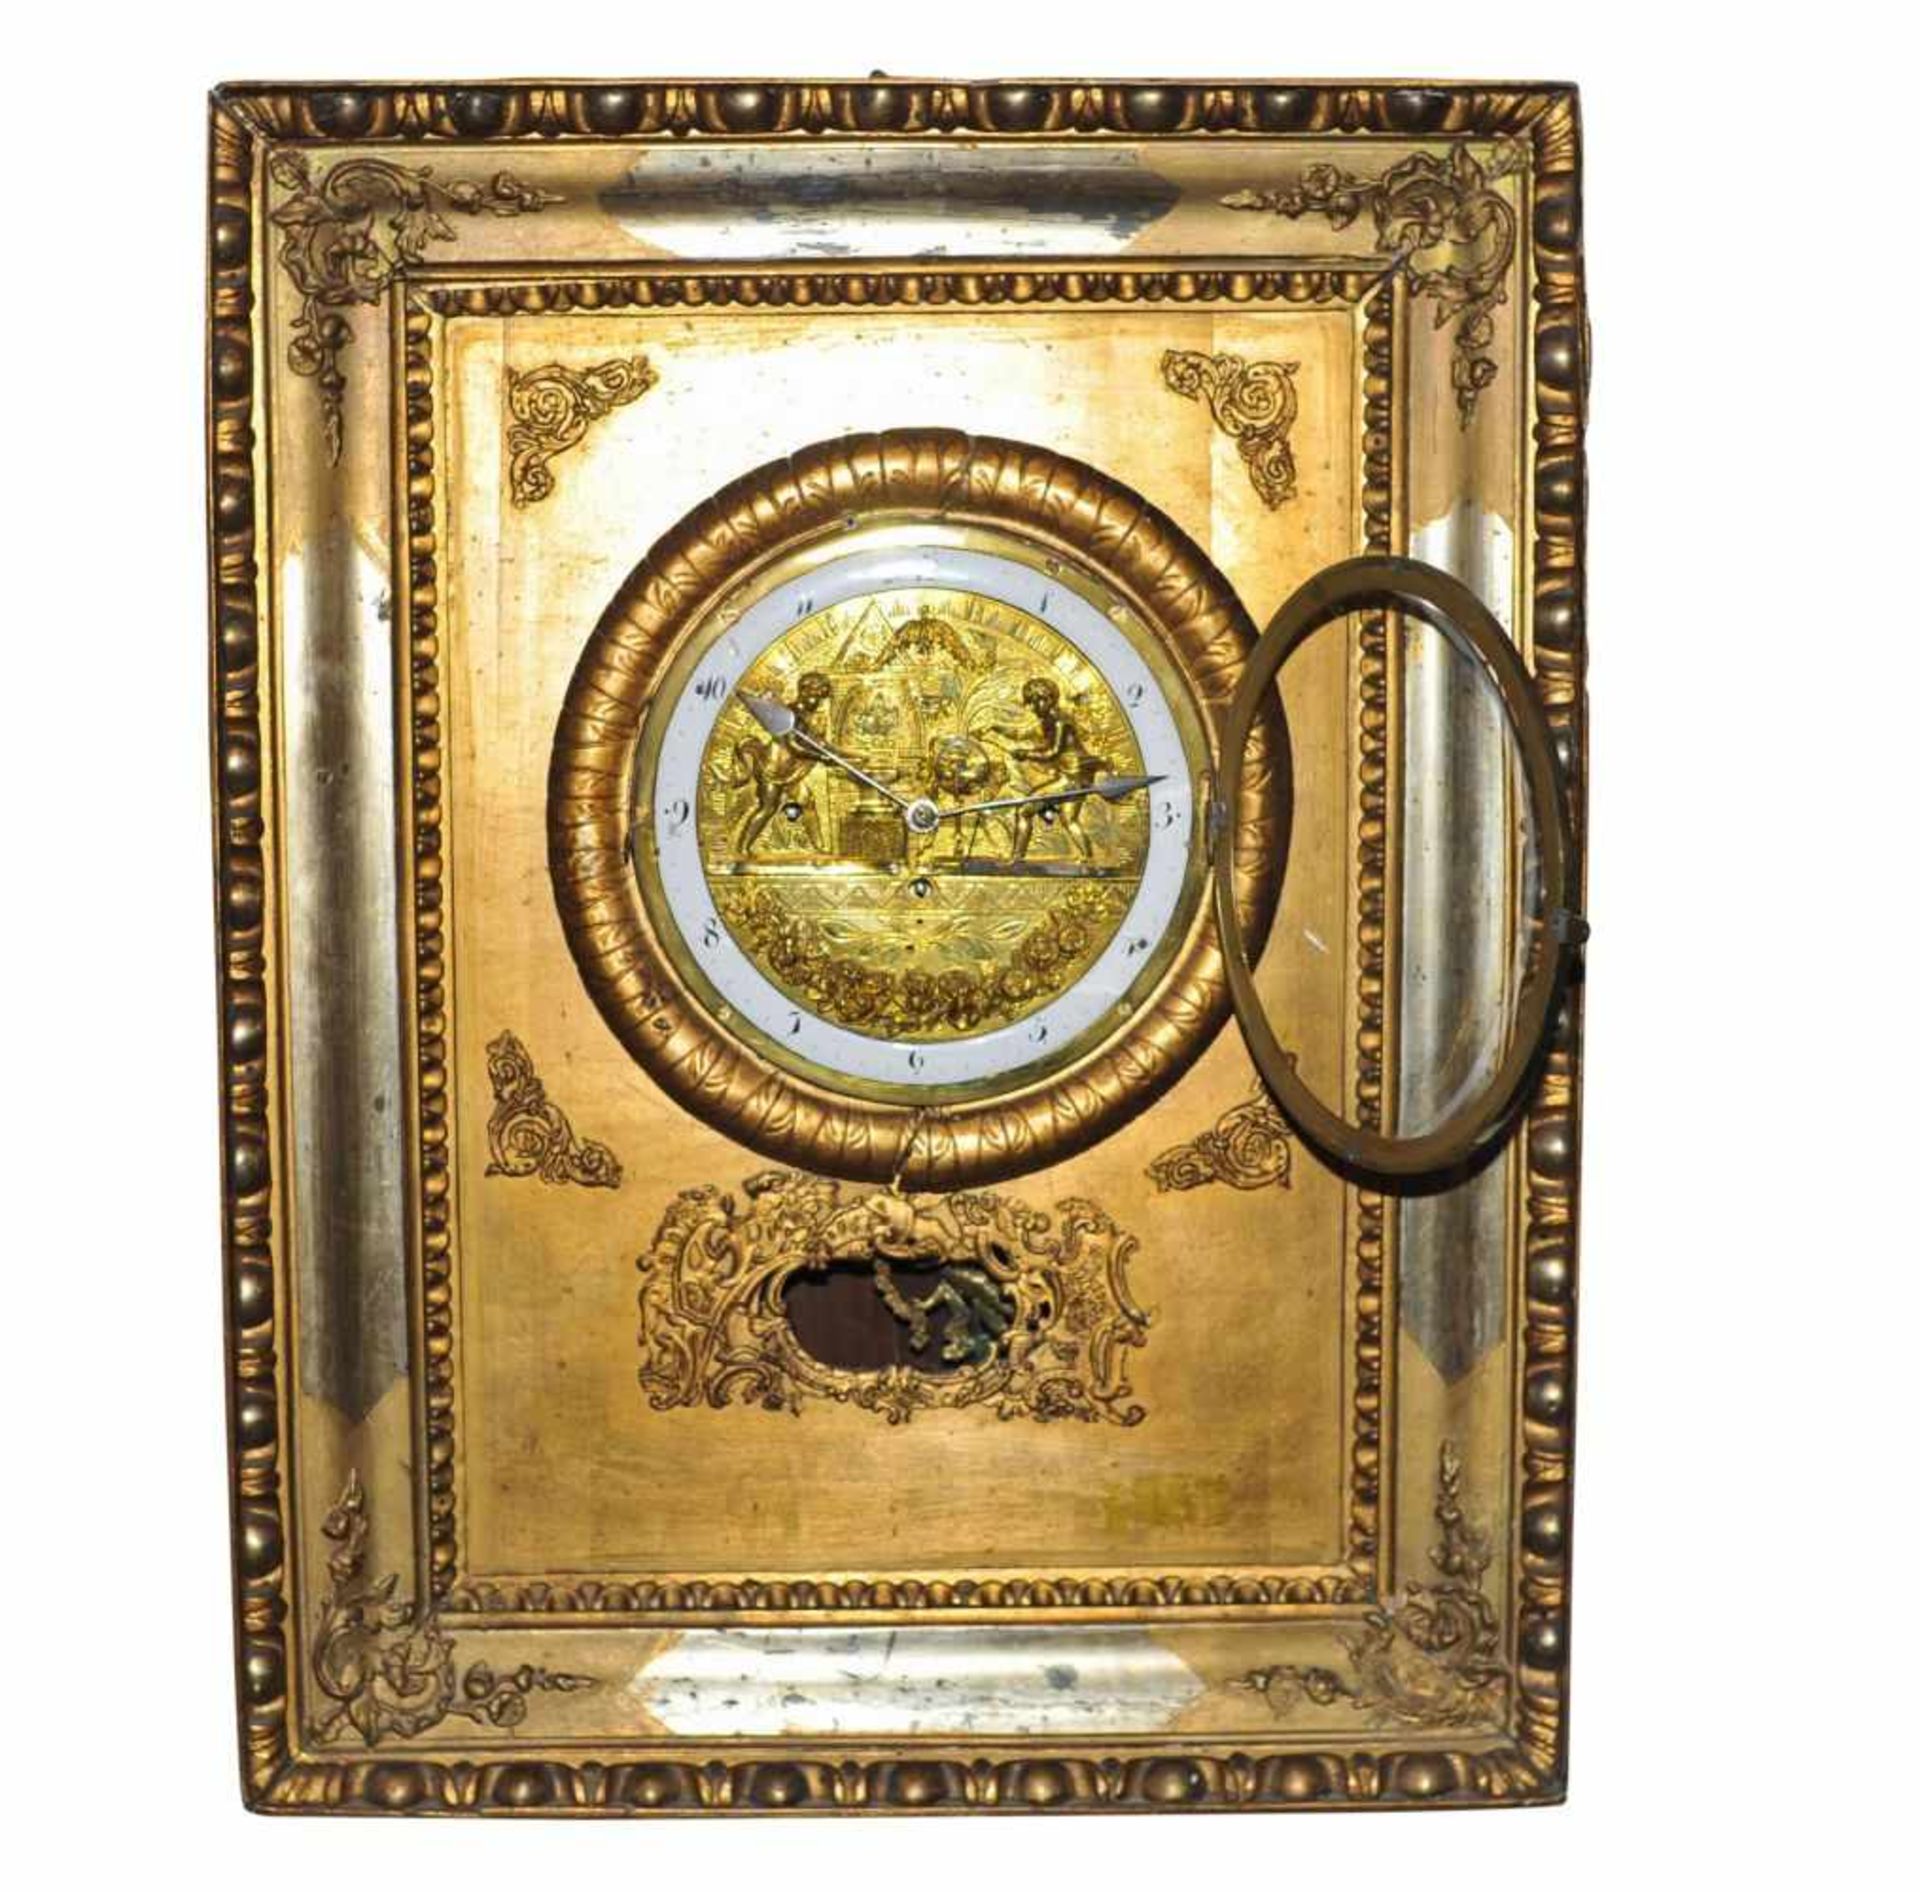 Vienna Frame clockgold-plated frame clock with iron smith & iron grinder 4/4 hour striking on 2 gong